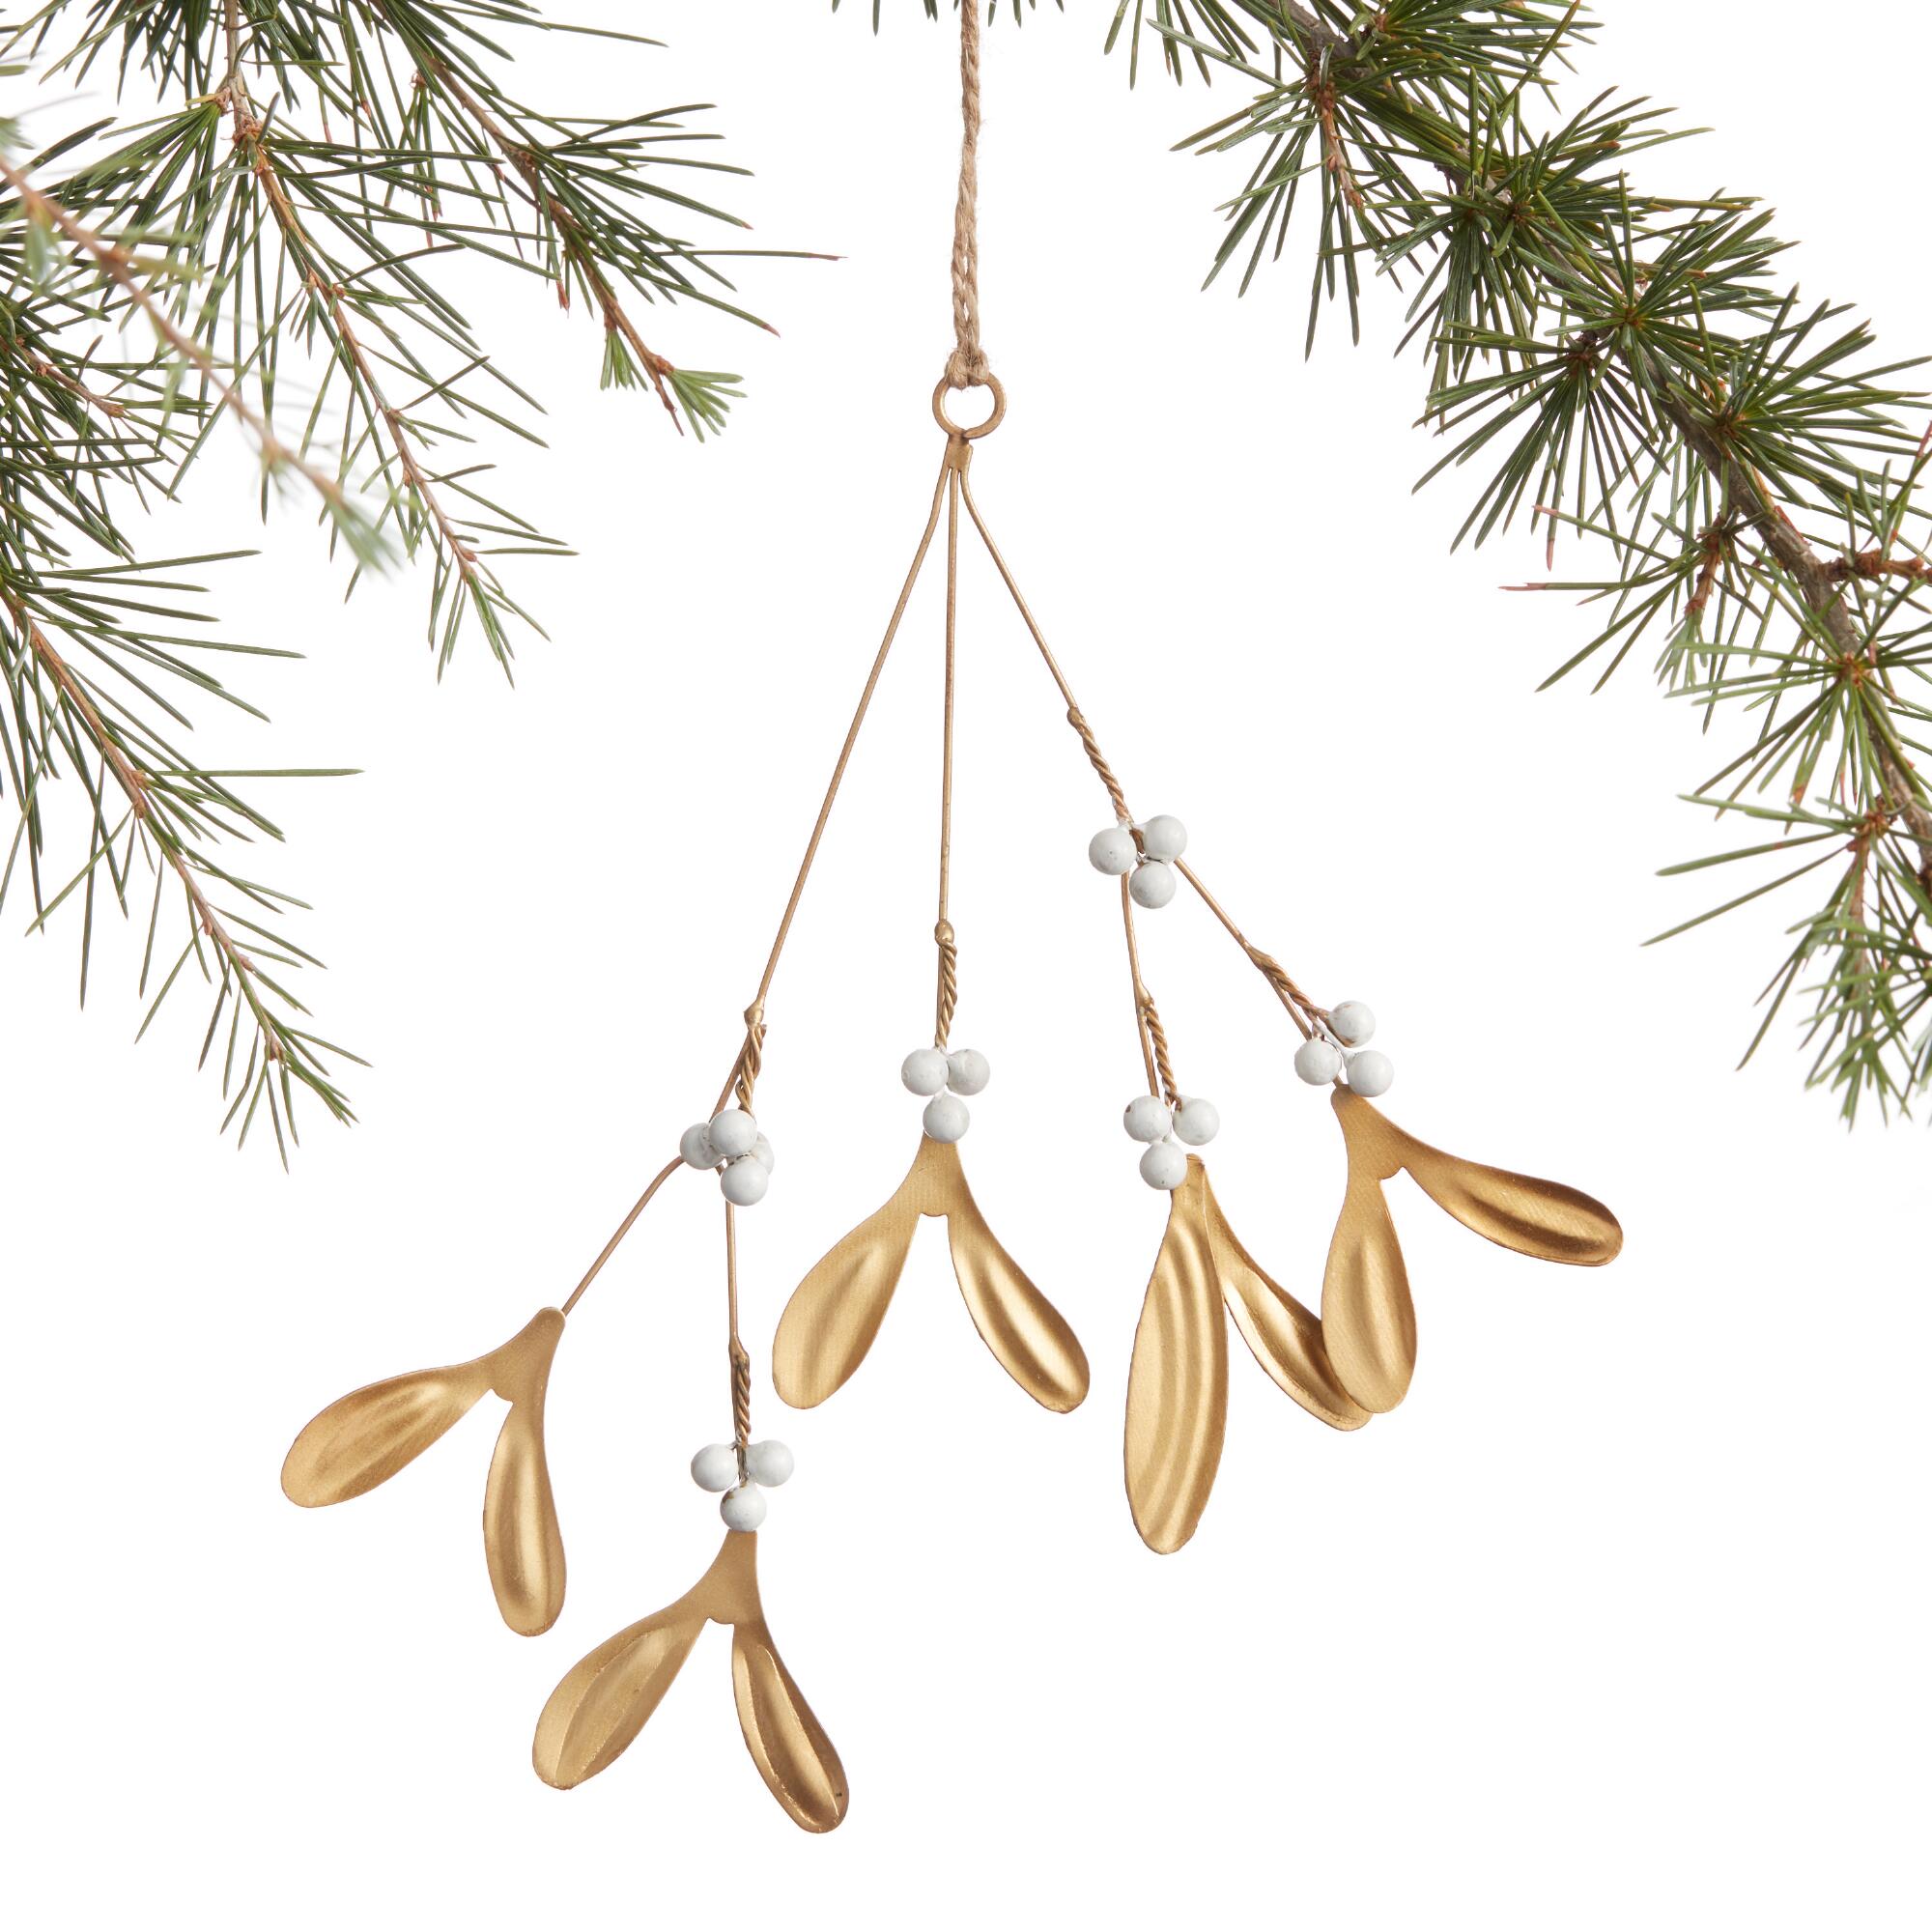 White and Gold Metal Mistletoe Ornament by World Market